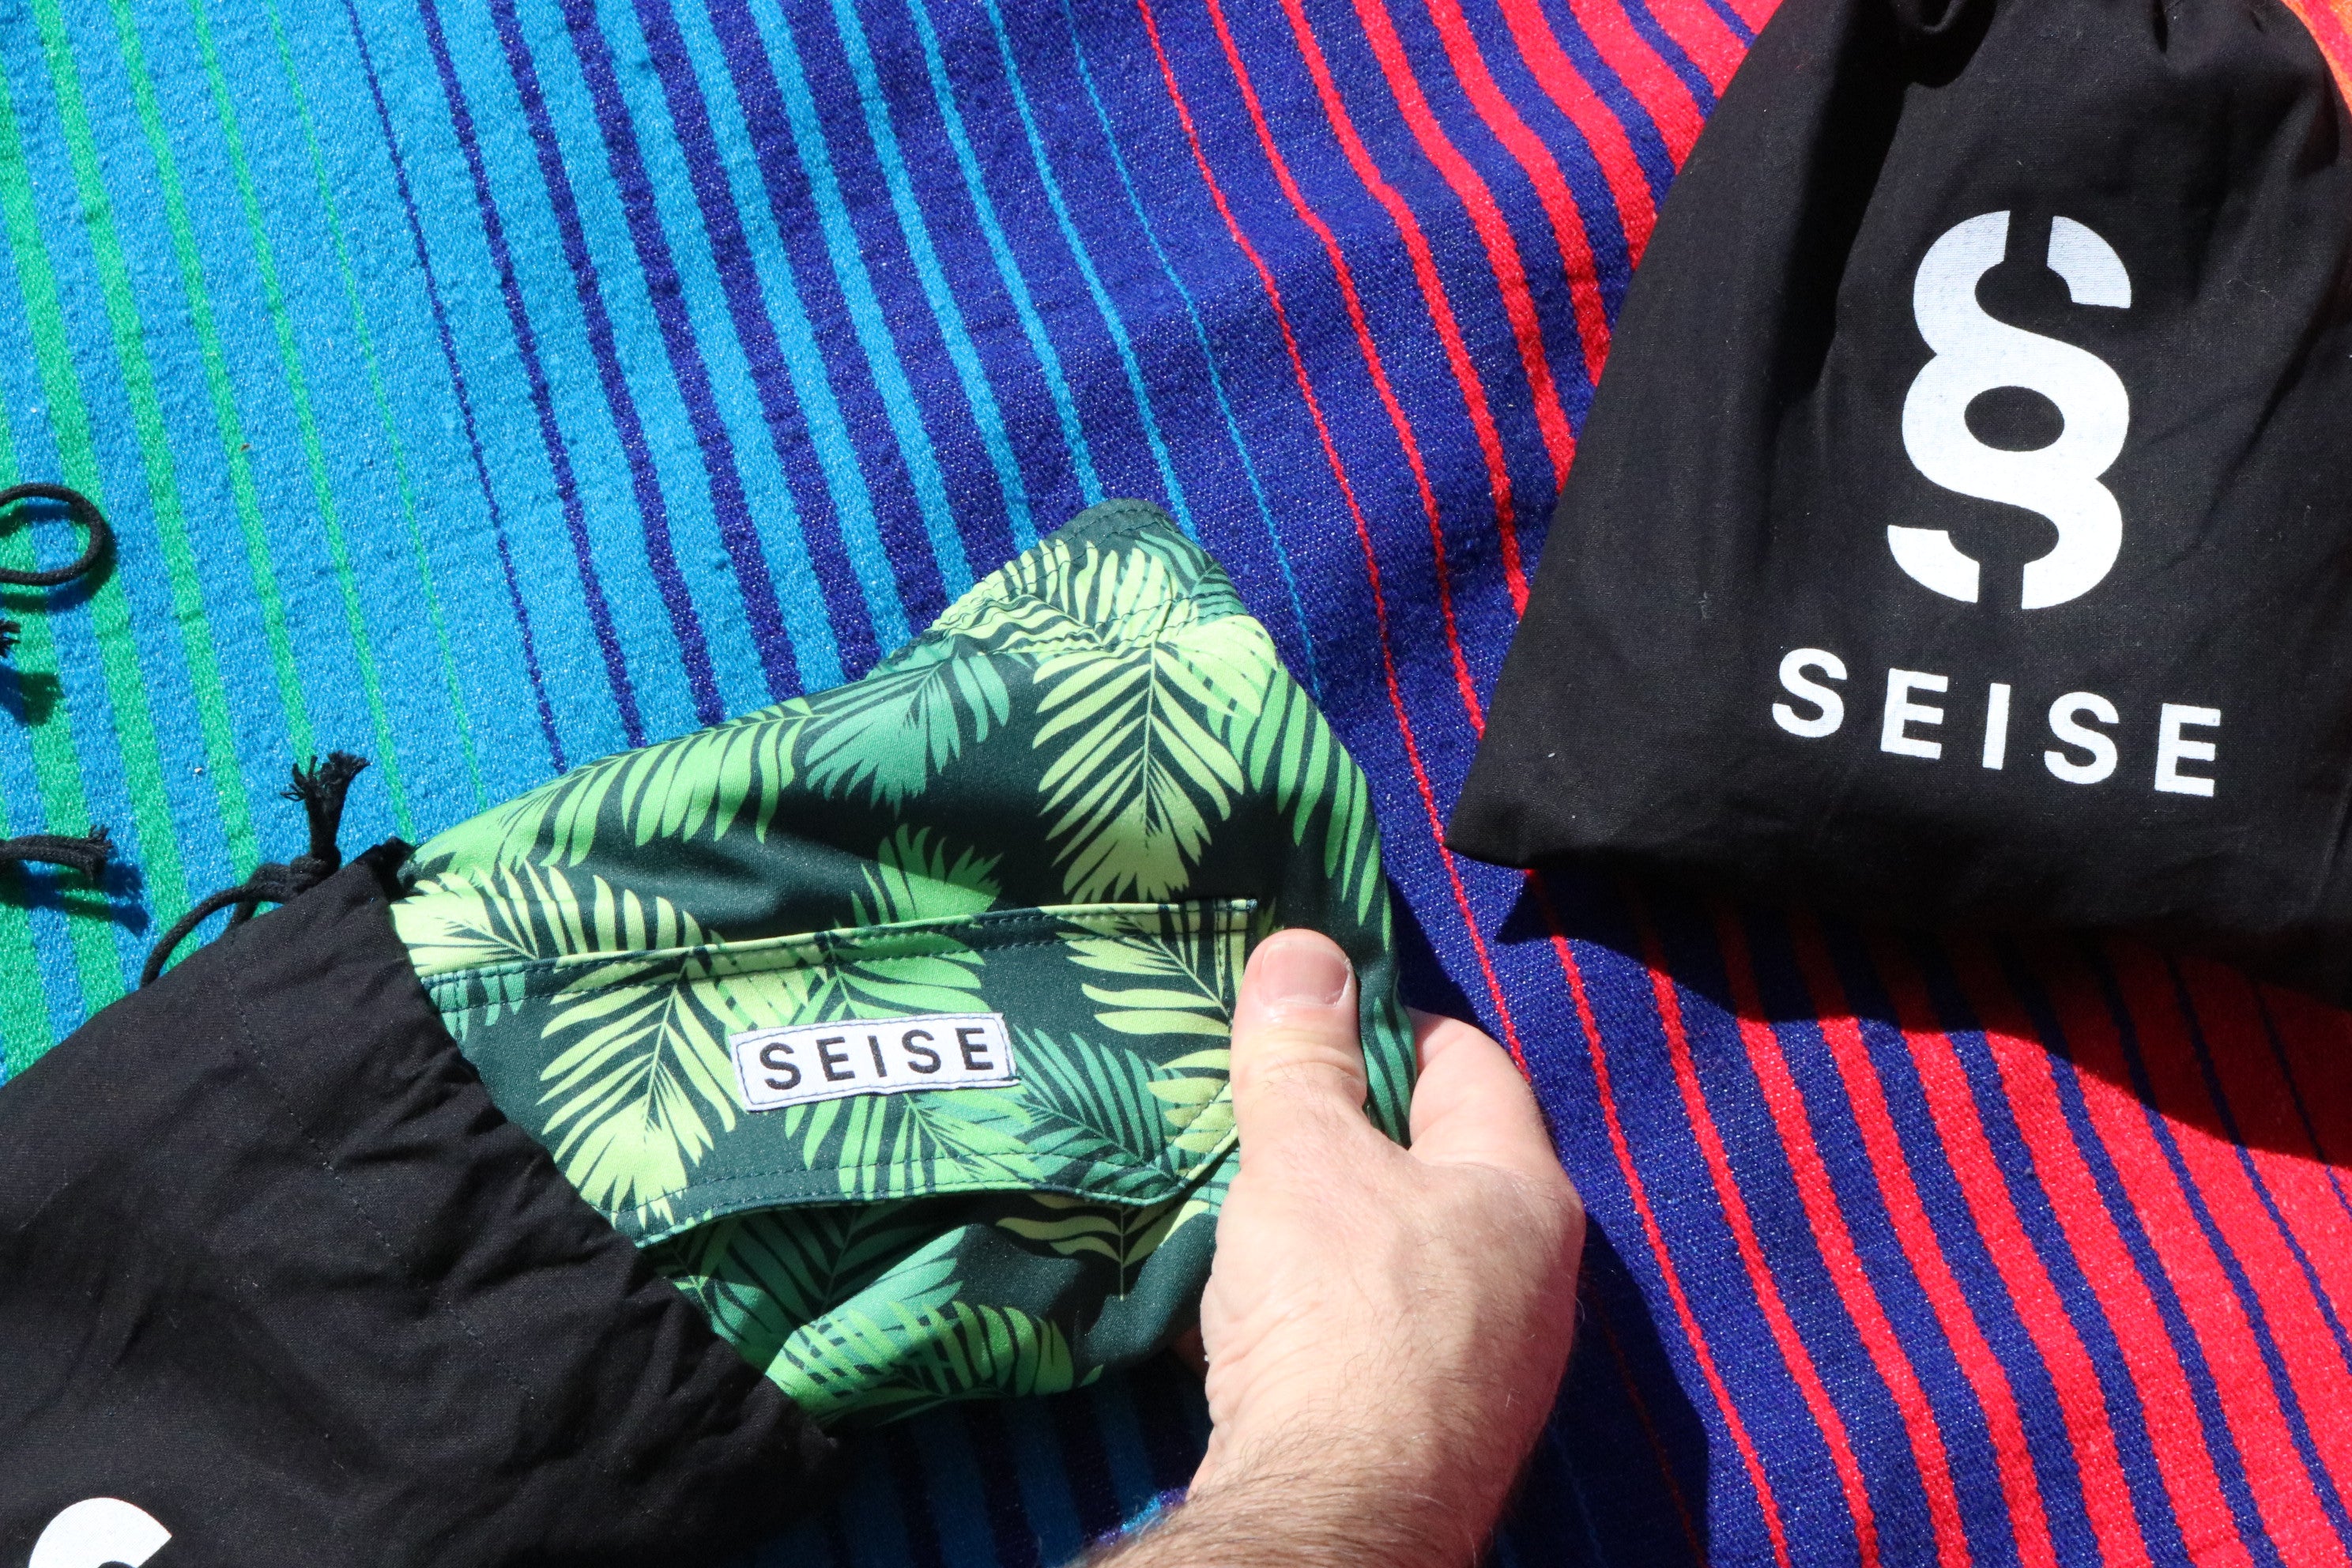 Men's Swim Trunks: a new line of men's swim shorts that pays attention to every detail of design and production with distinctive custom fabric prints. Shop your favorite men's swimwear at seisewear.com and see our summer collection of 4 inch bathing suits